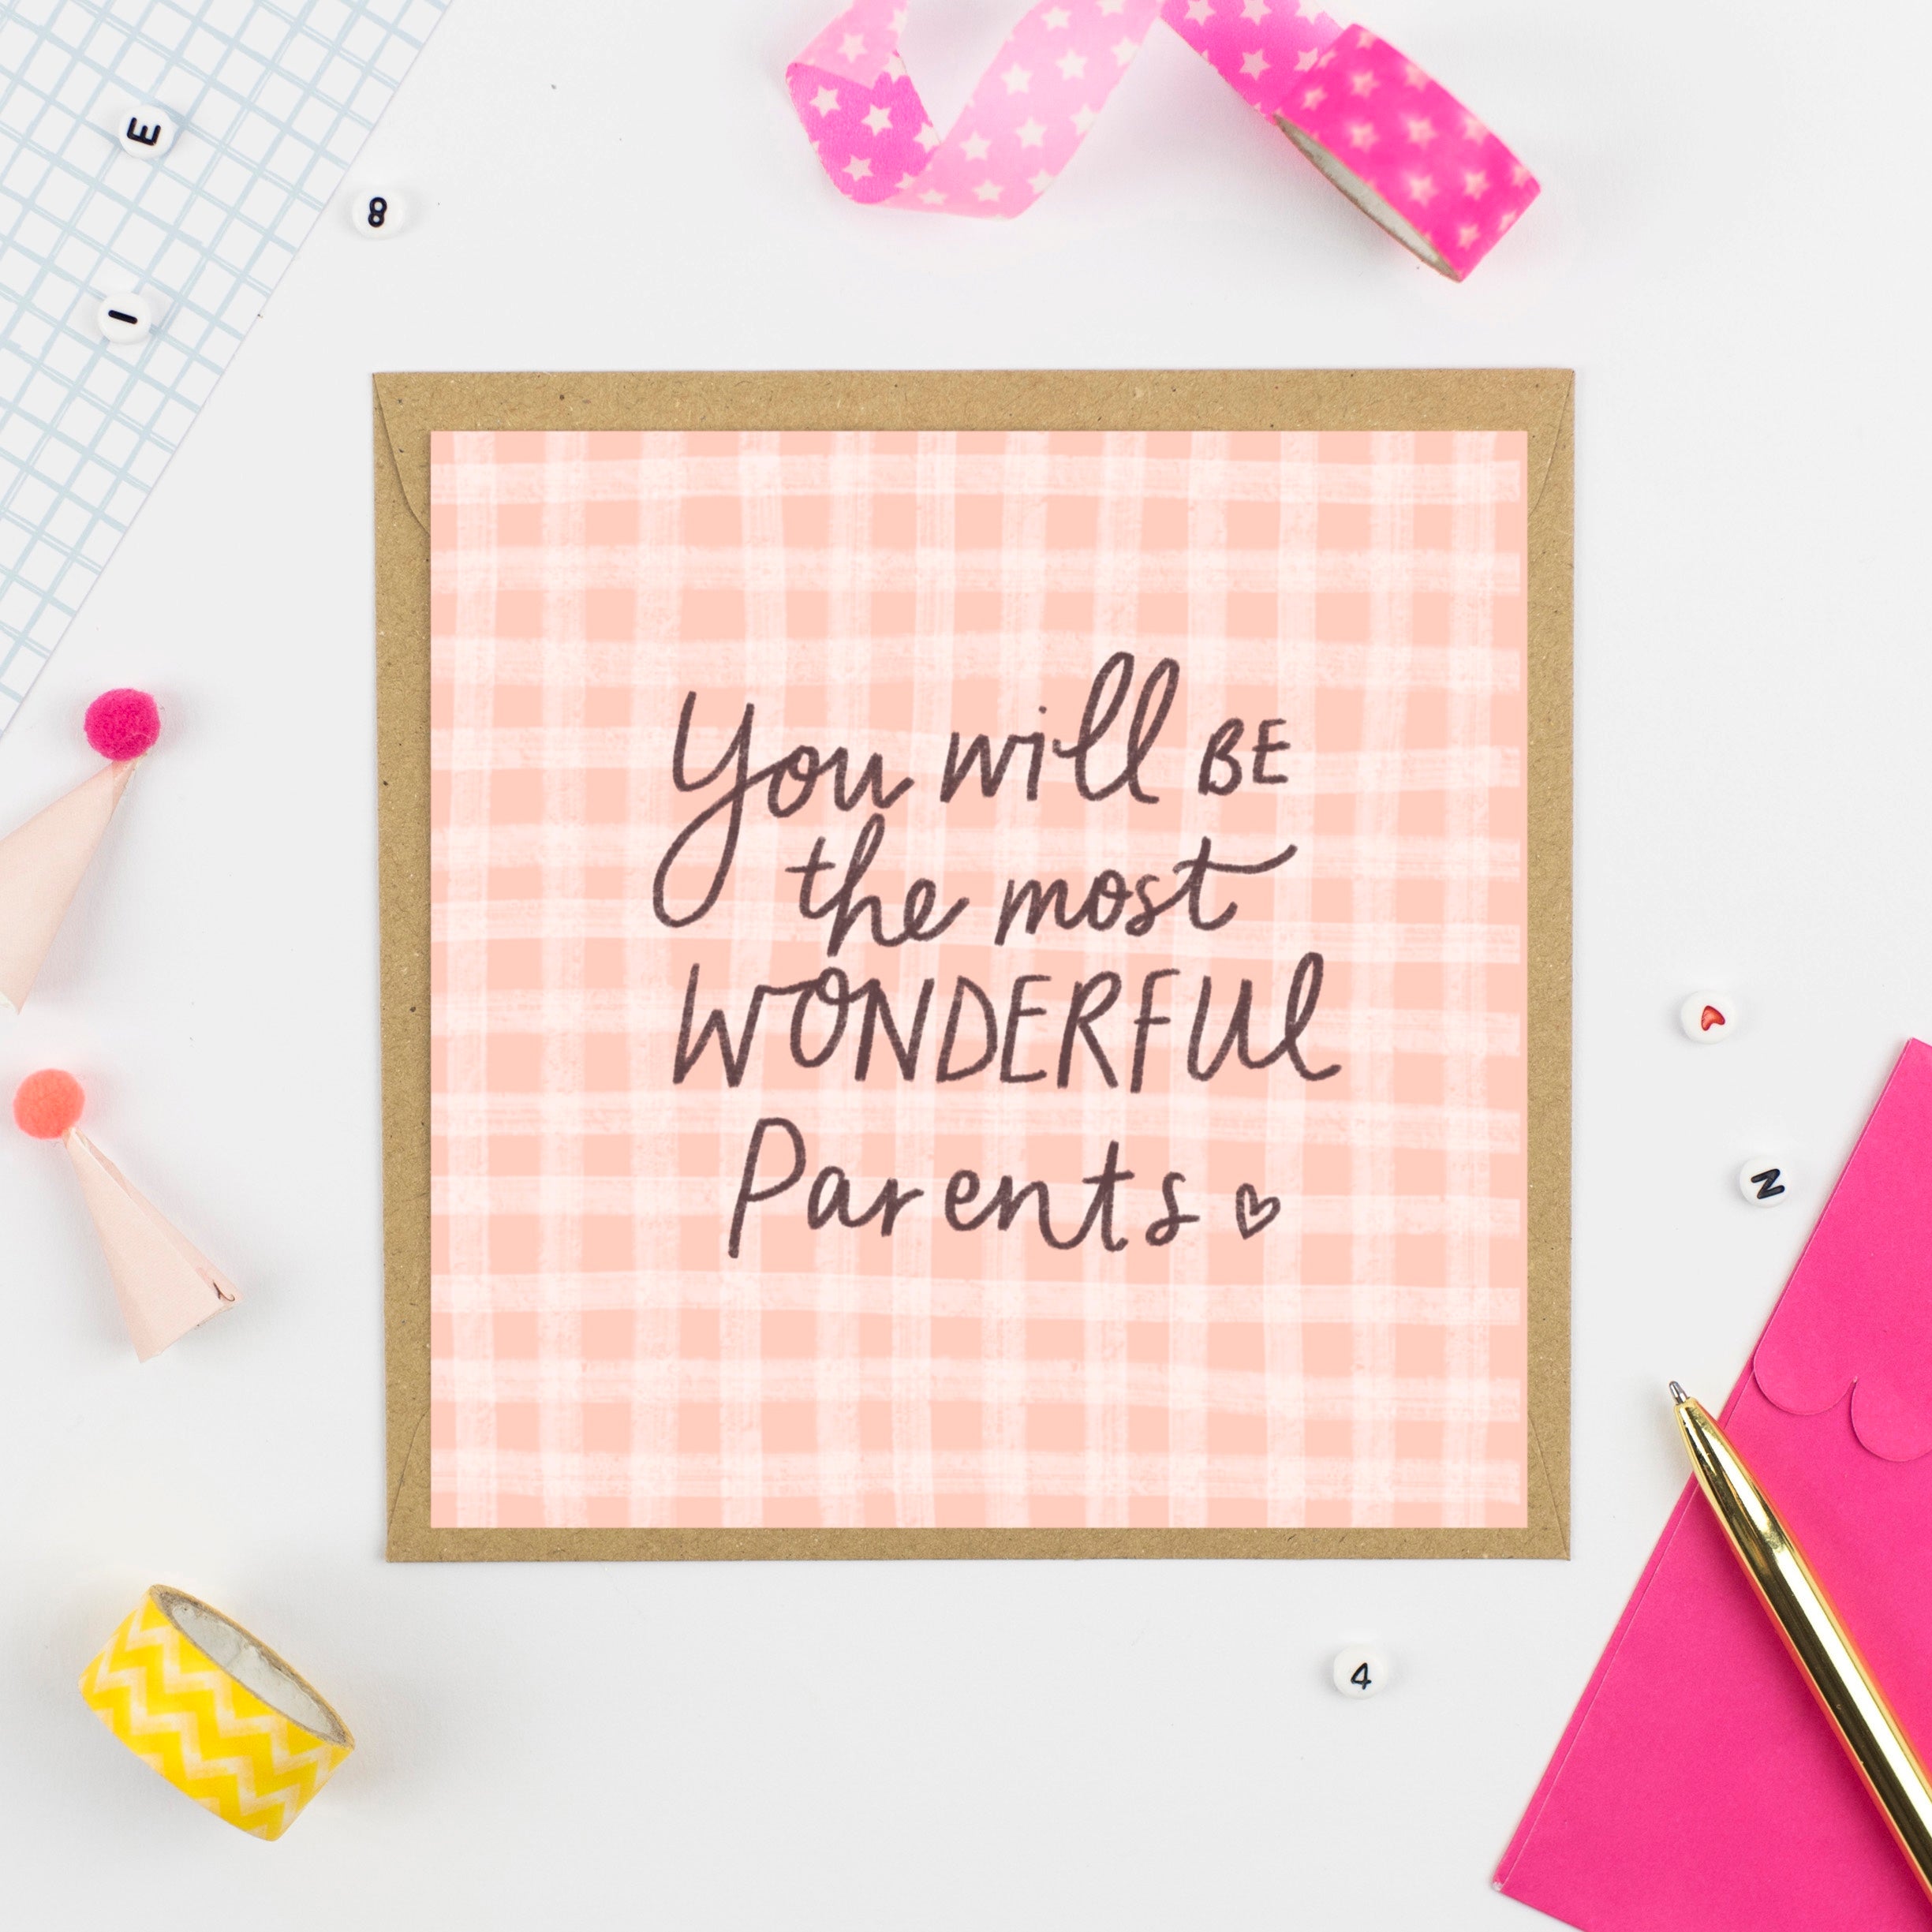 You will be wonderful parents